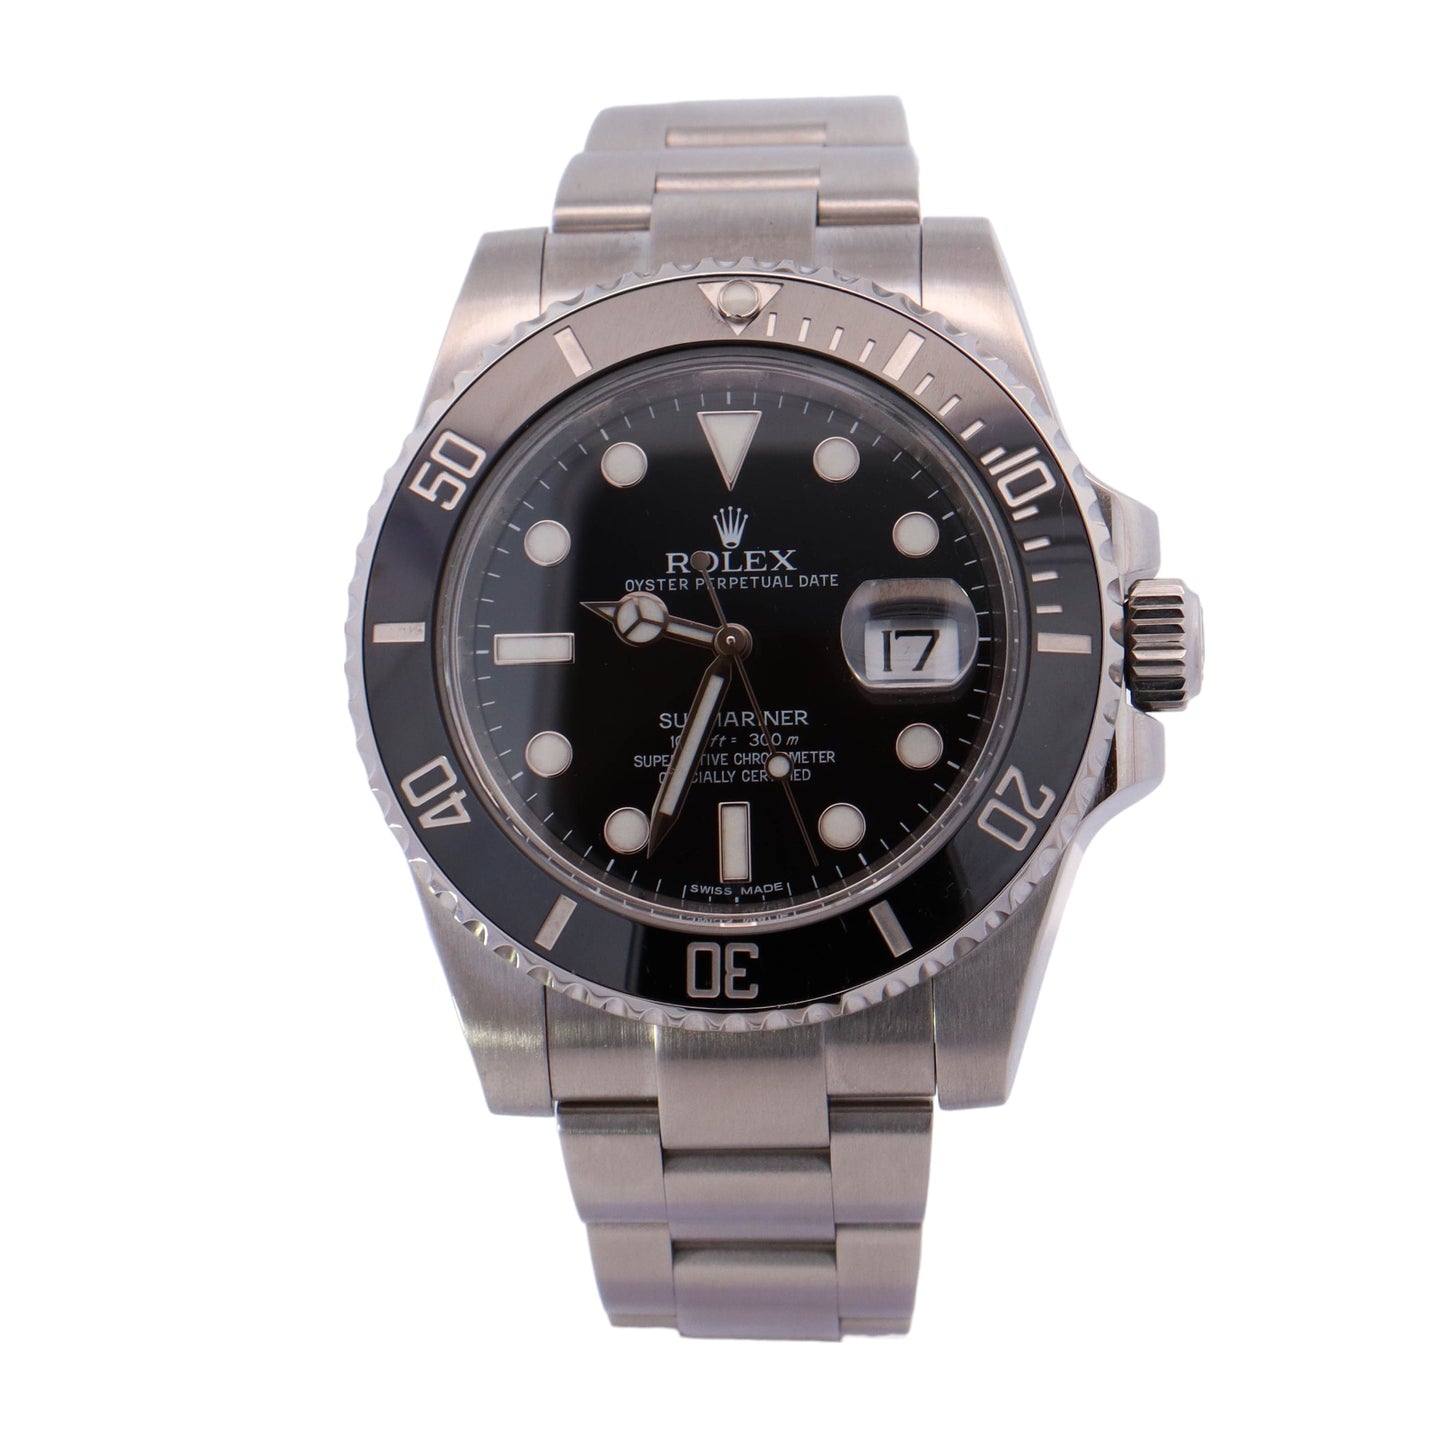 Rolex Submariner Stainless Steel 41mm Black Dot Dial Watch Reference #: 126610LN - Happy Jewelers Fine Jewelry Lifetime Warranty